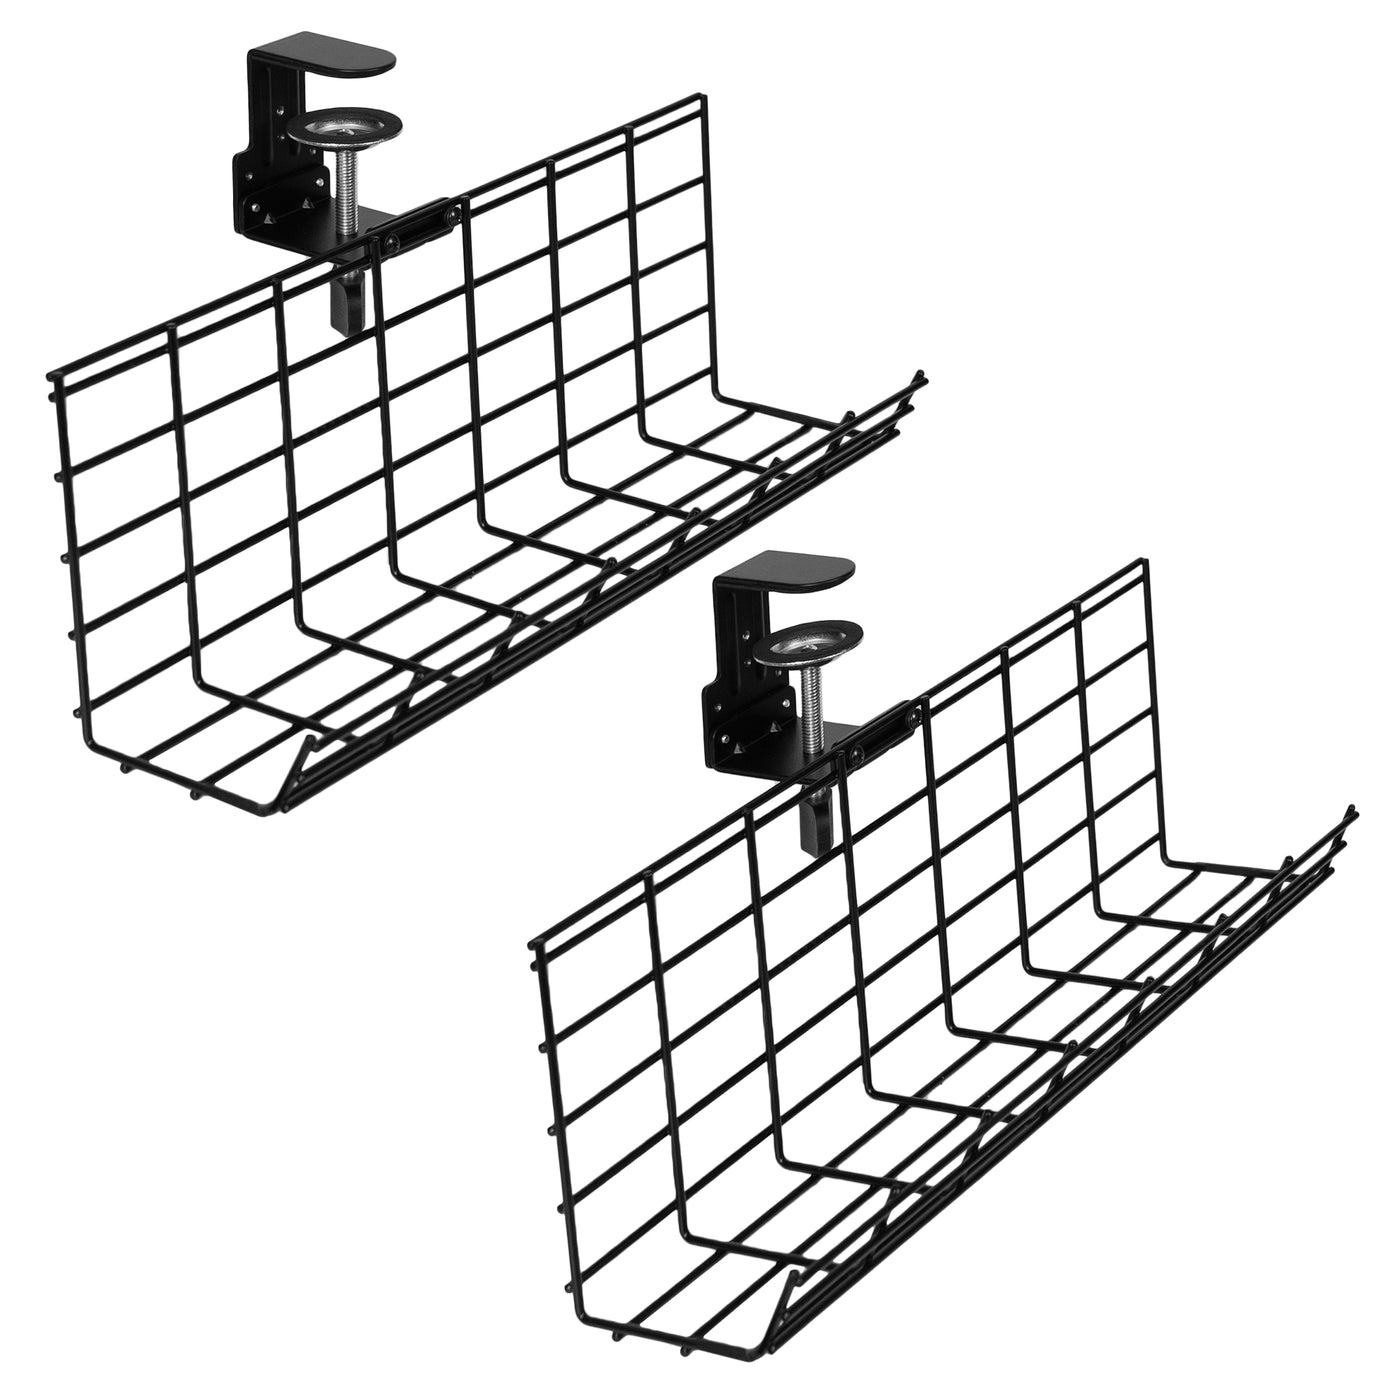 Mount-It! Black Under Desk Cable Tray, Wire Management Basket for